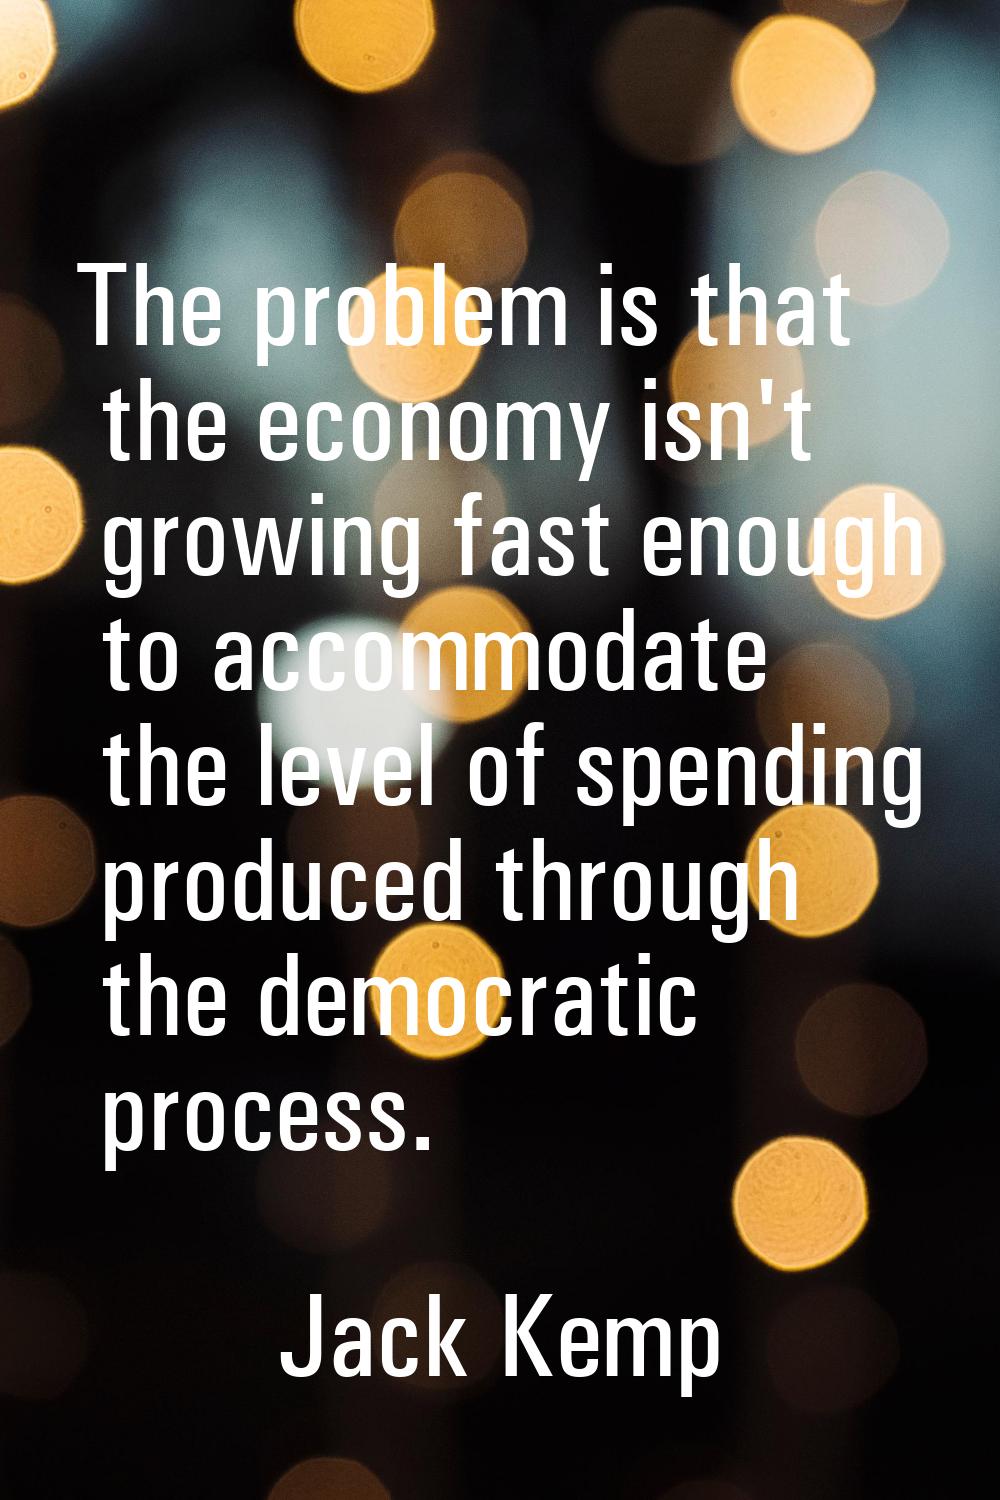 The problem is that the economy isn't growing fast enough to accommodate the level of spending prod